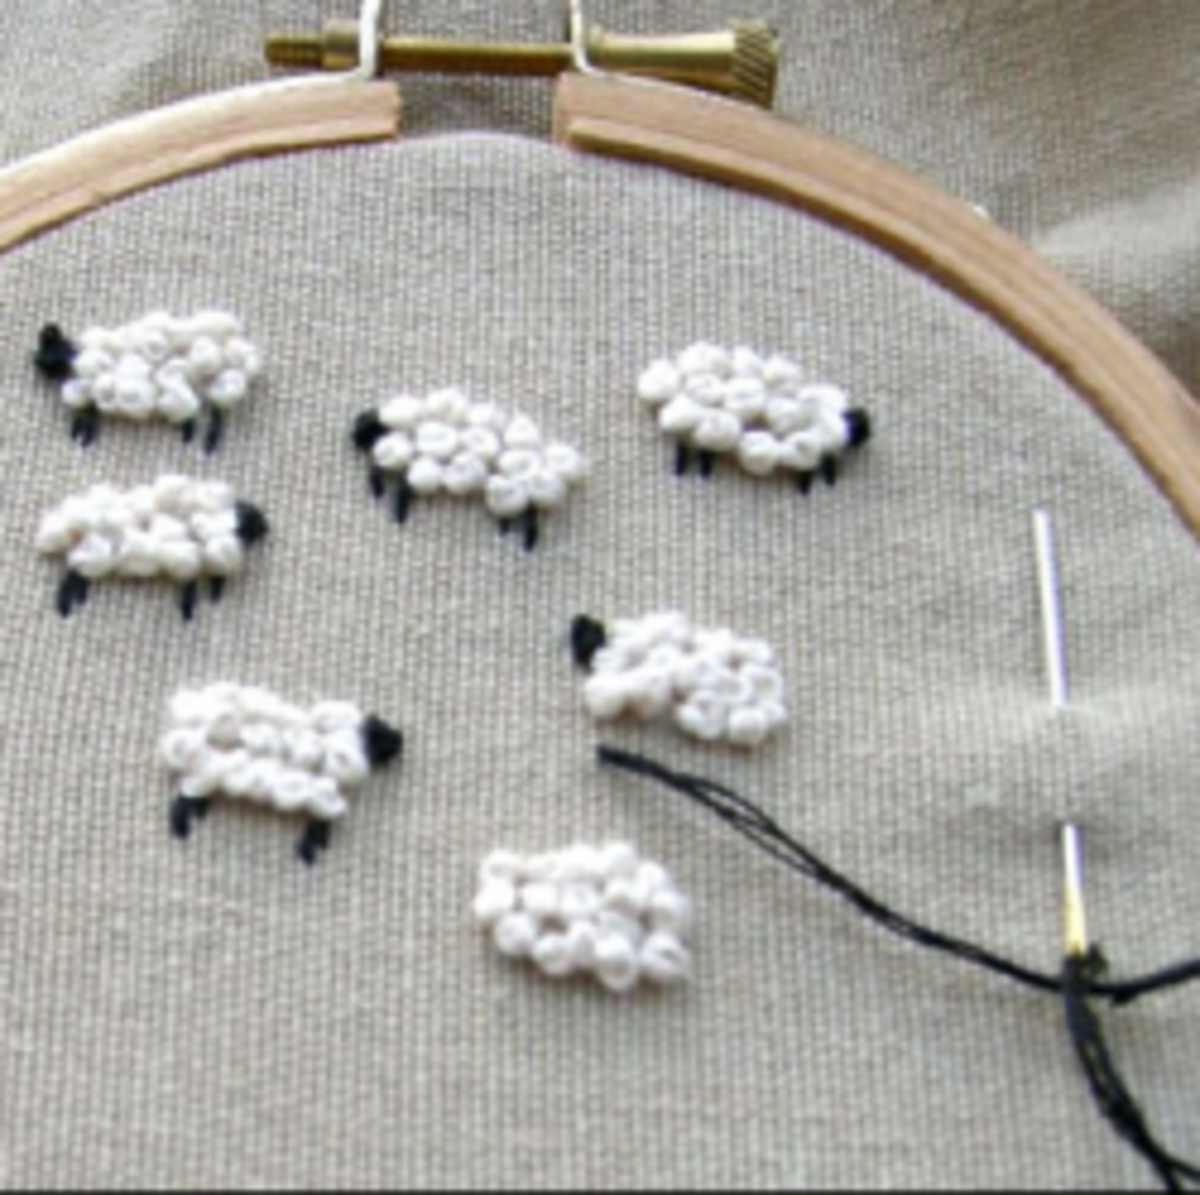 How to Embroider for Beginners | Learn Embroidery Stitches | Craft Tutorials & Projects